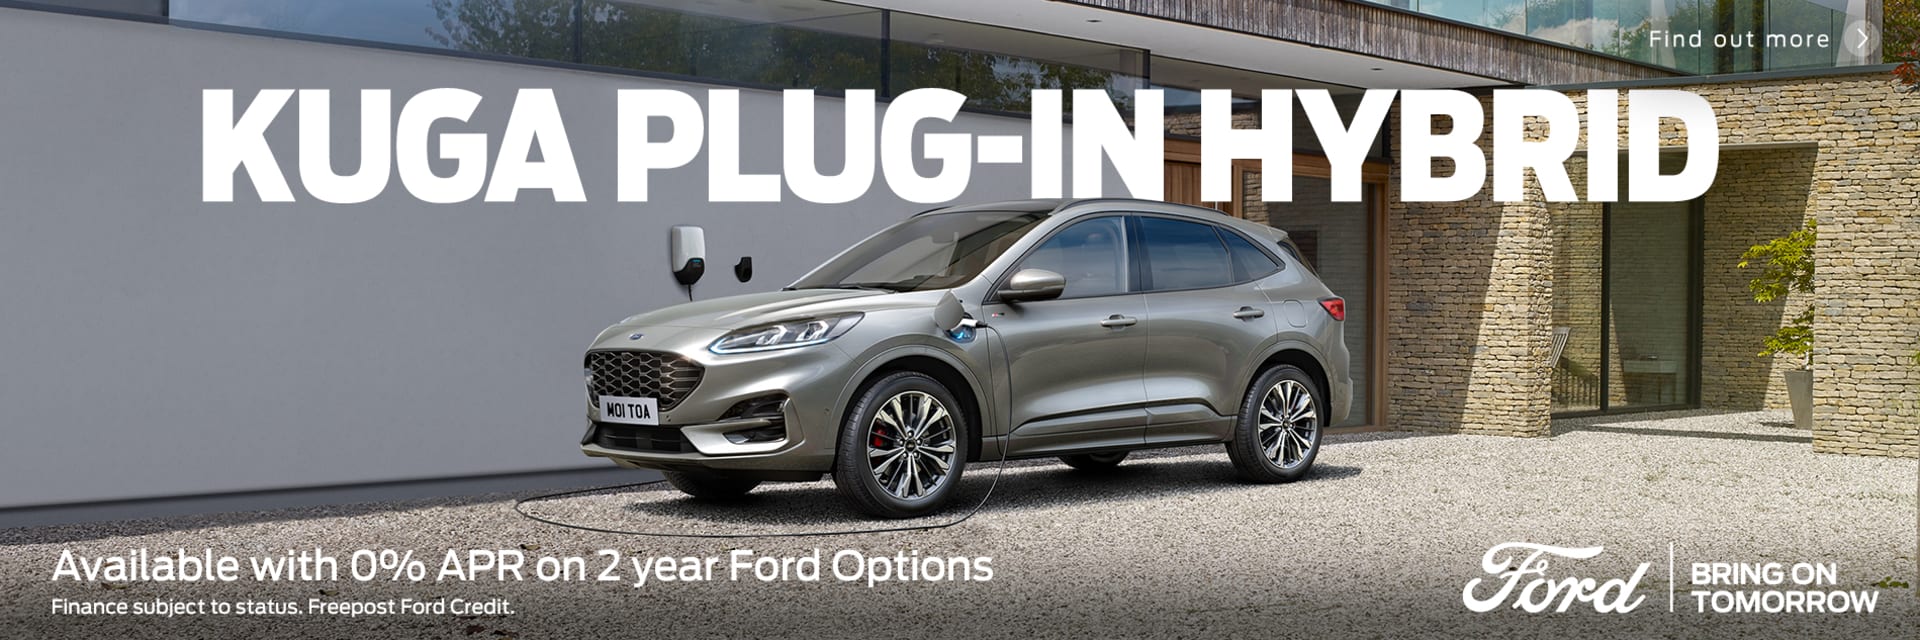 Ford Kuga 0% APR on 2 Year Ford Options